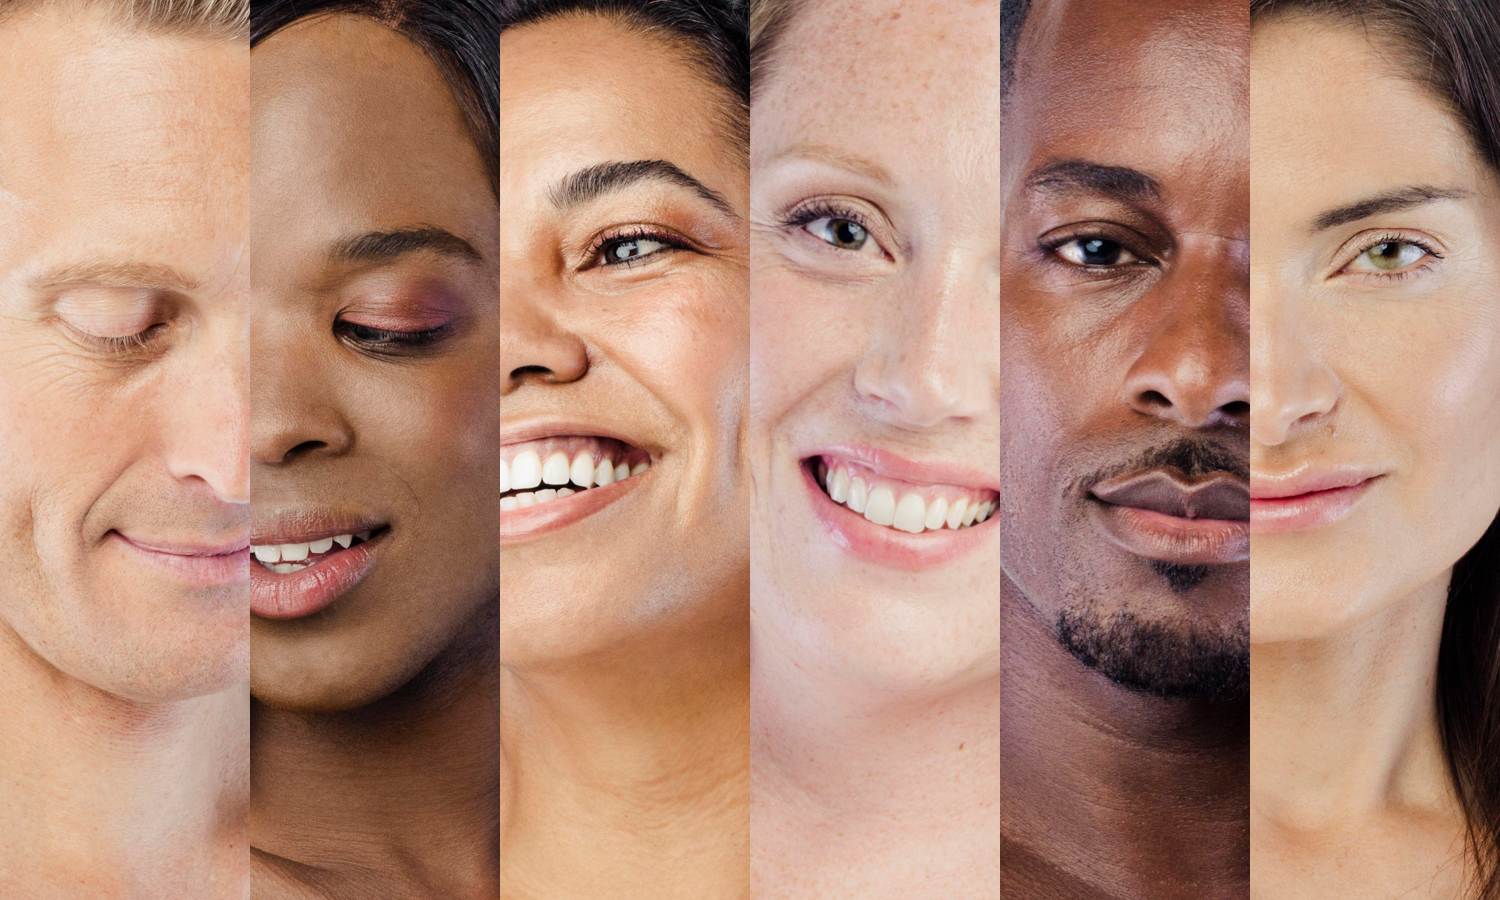 Image of people with different Fitzpatrick skin type scores